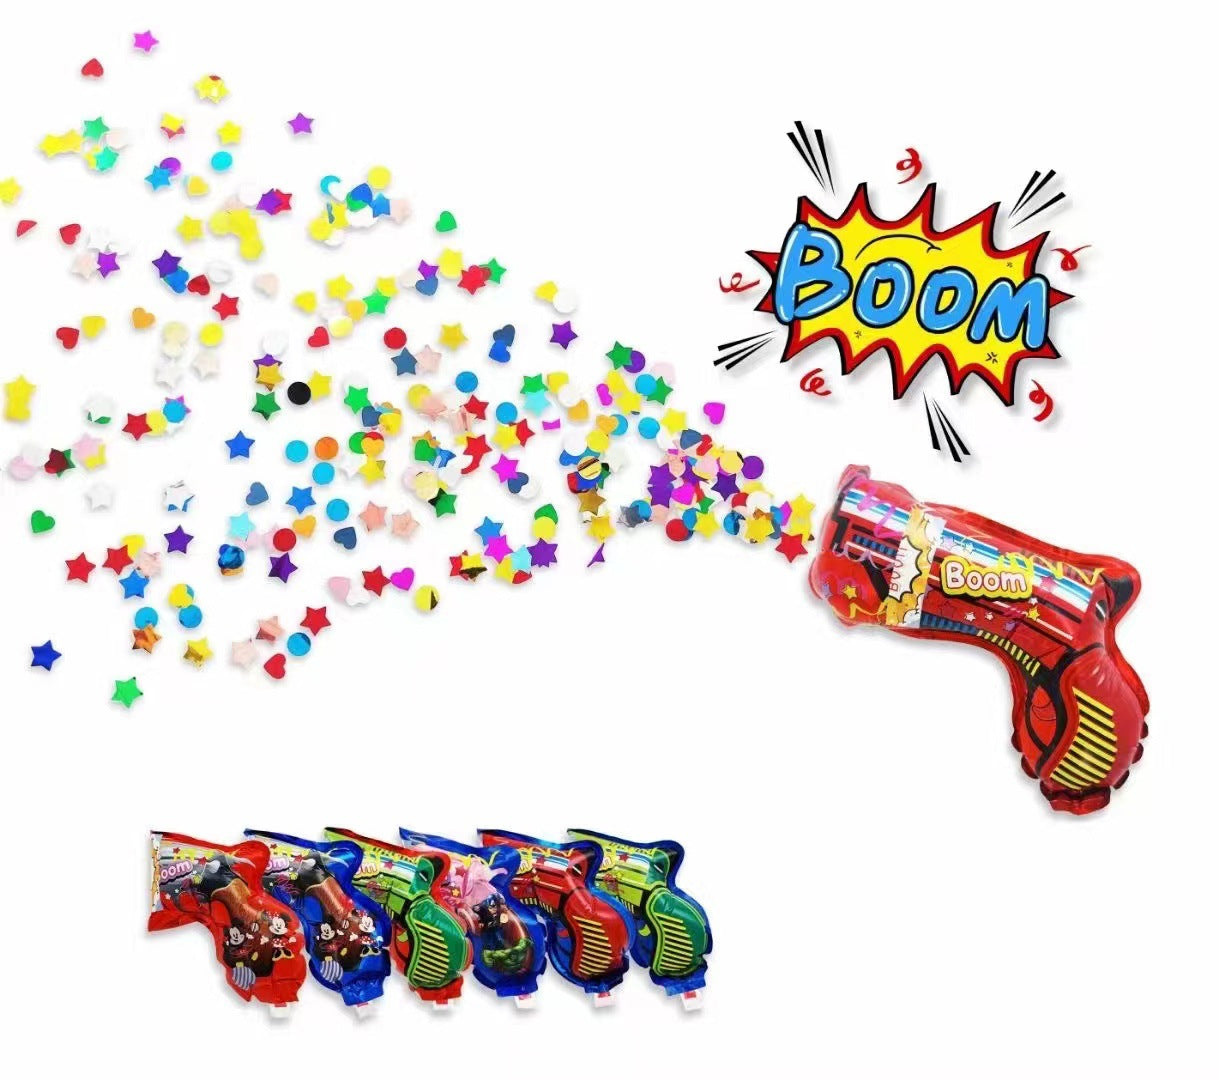 Automatic Inflatable Spray Balloon Hand Held Salute Fireworks